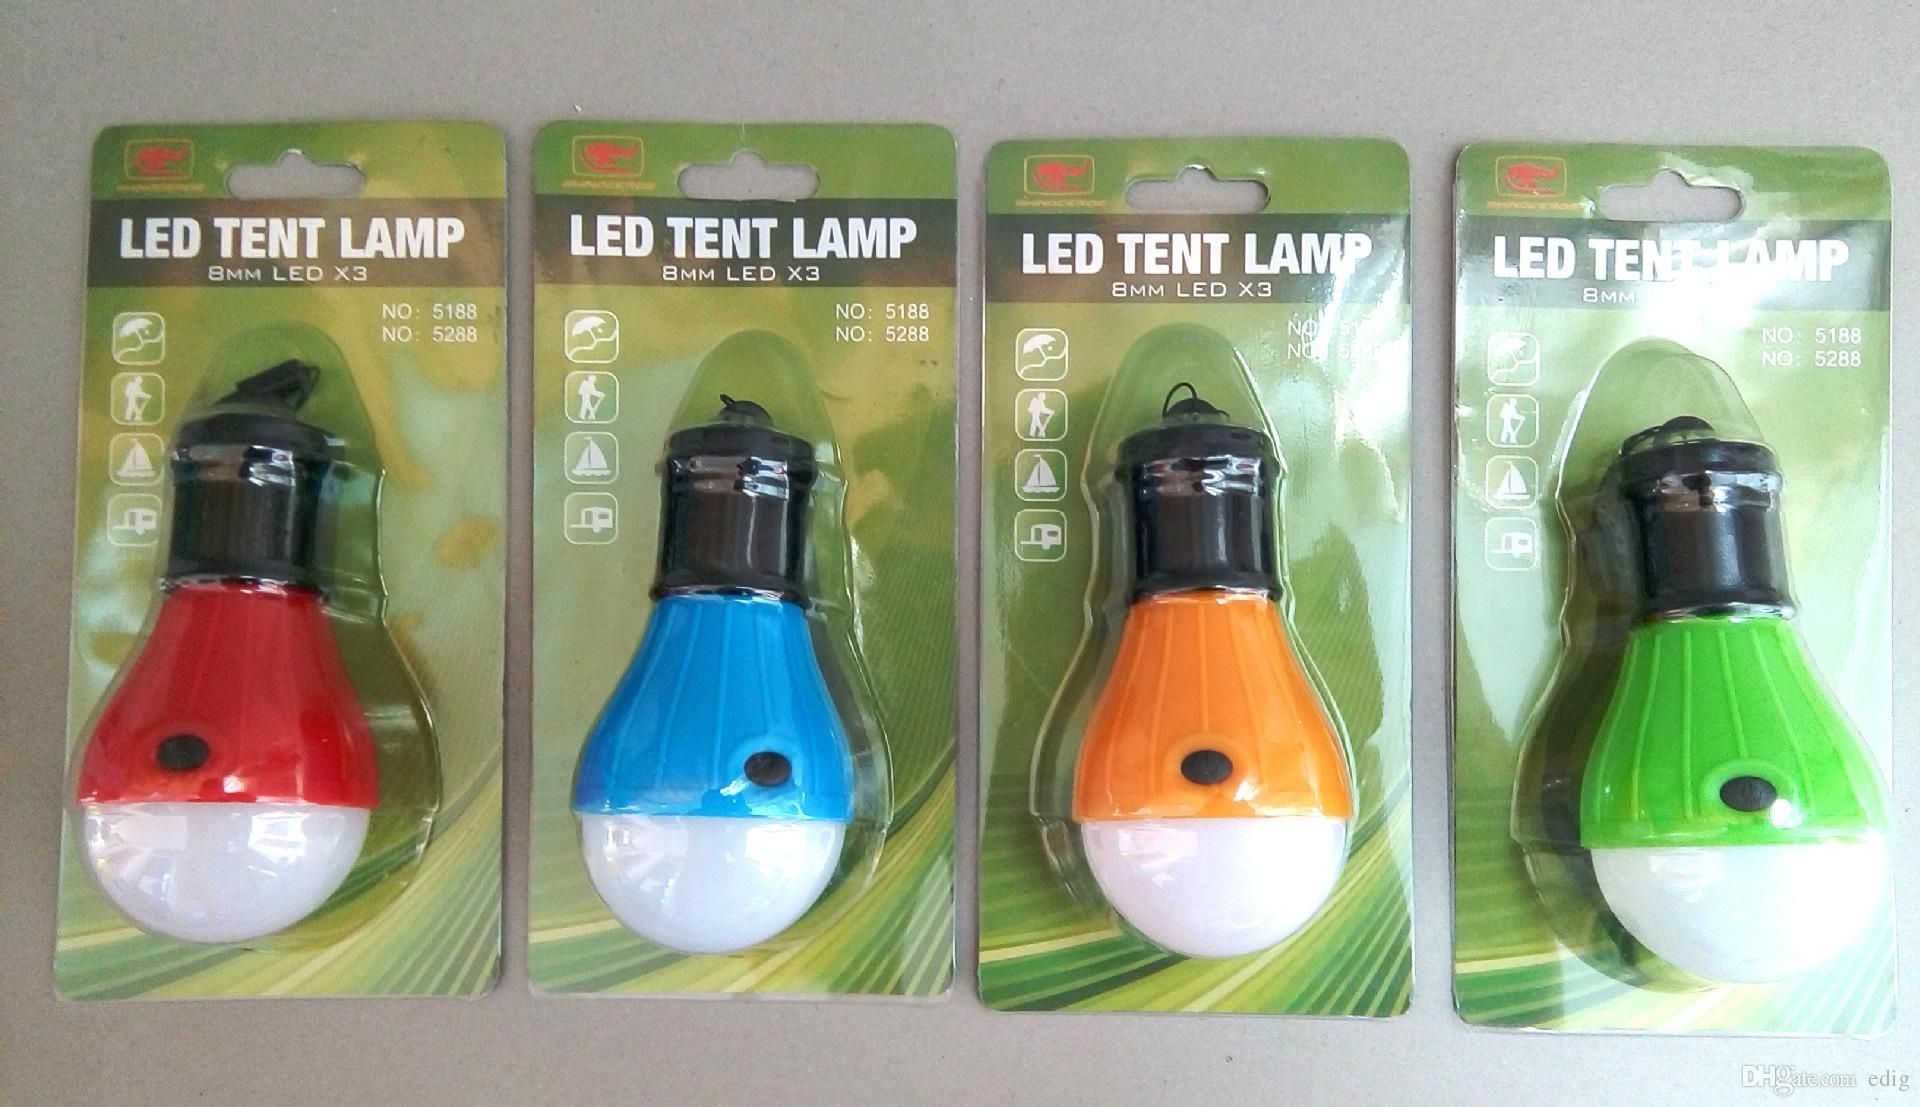 Premium Soft Light Outdoor Hanging 8mm 3 Led Camping Tent Light Bulb With Regard To Outdoor Hanging Camping Lights (View 12 of 15)